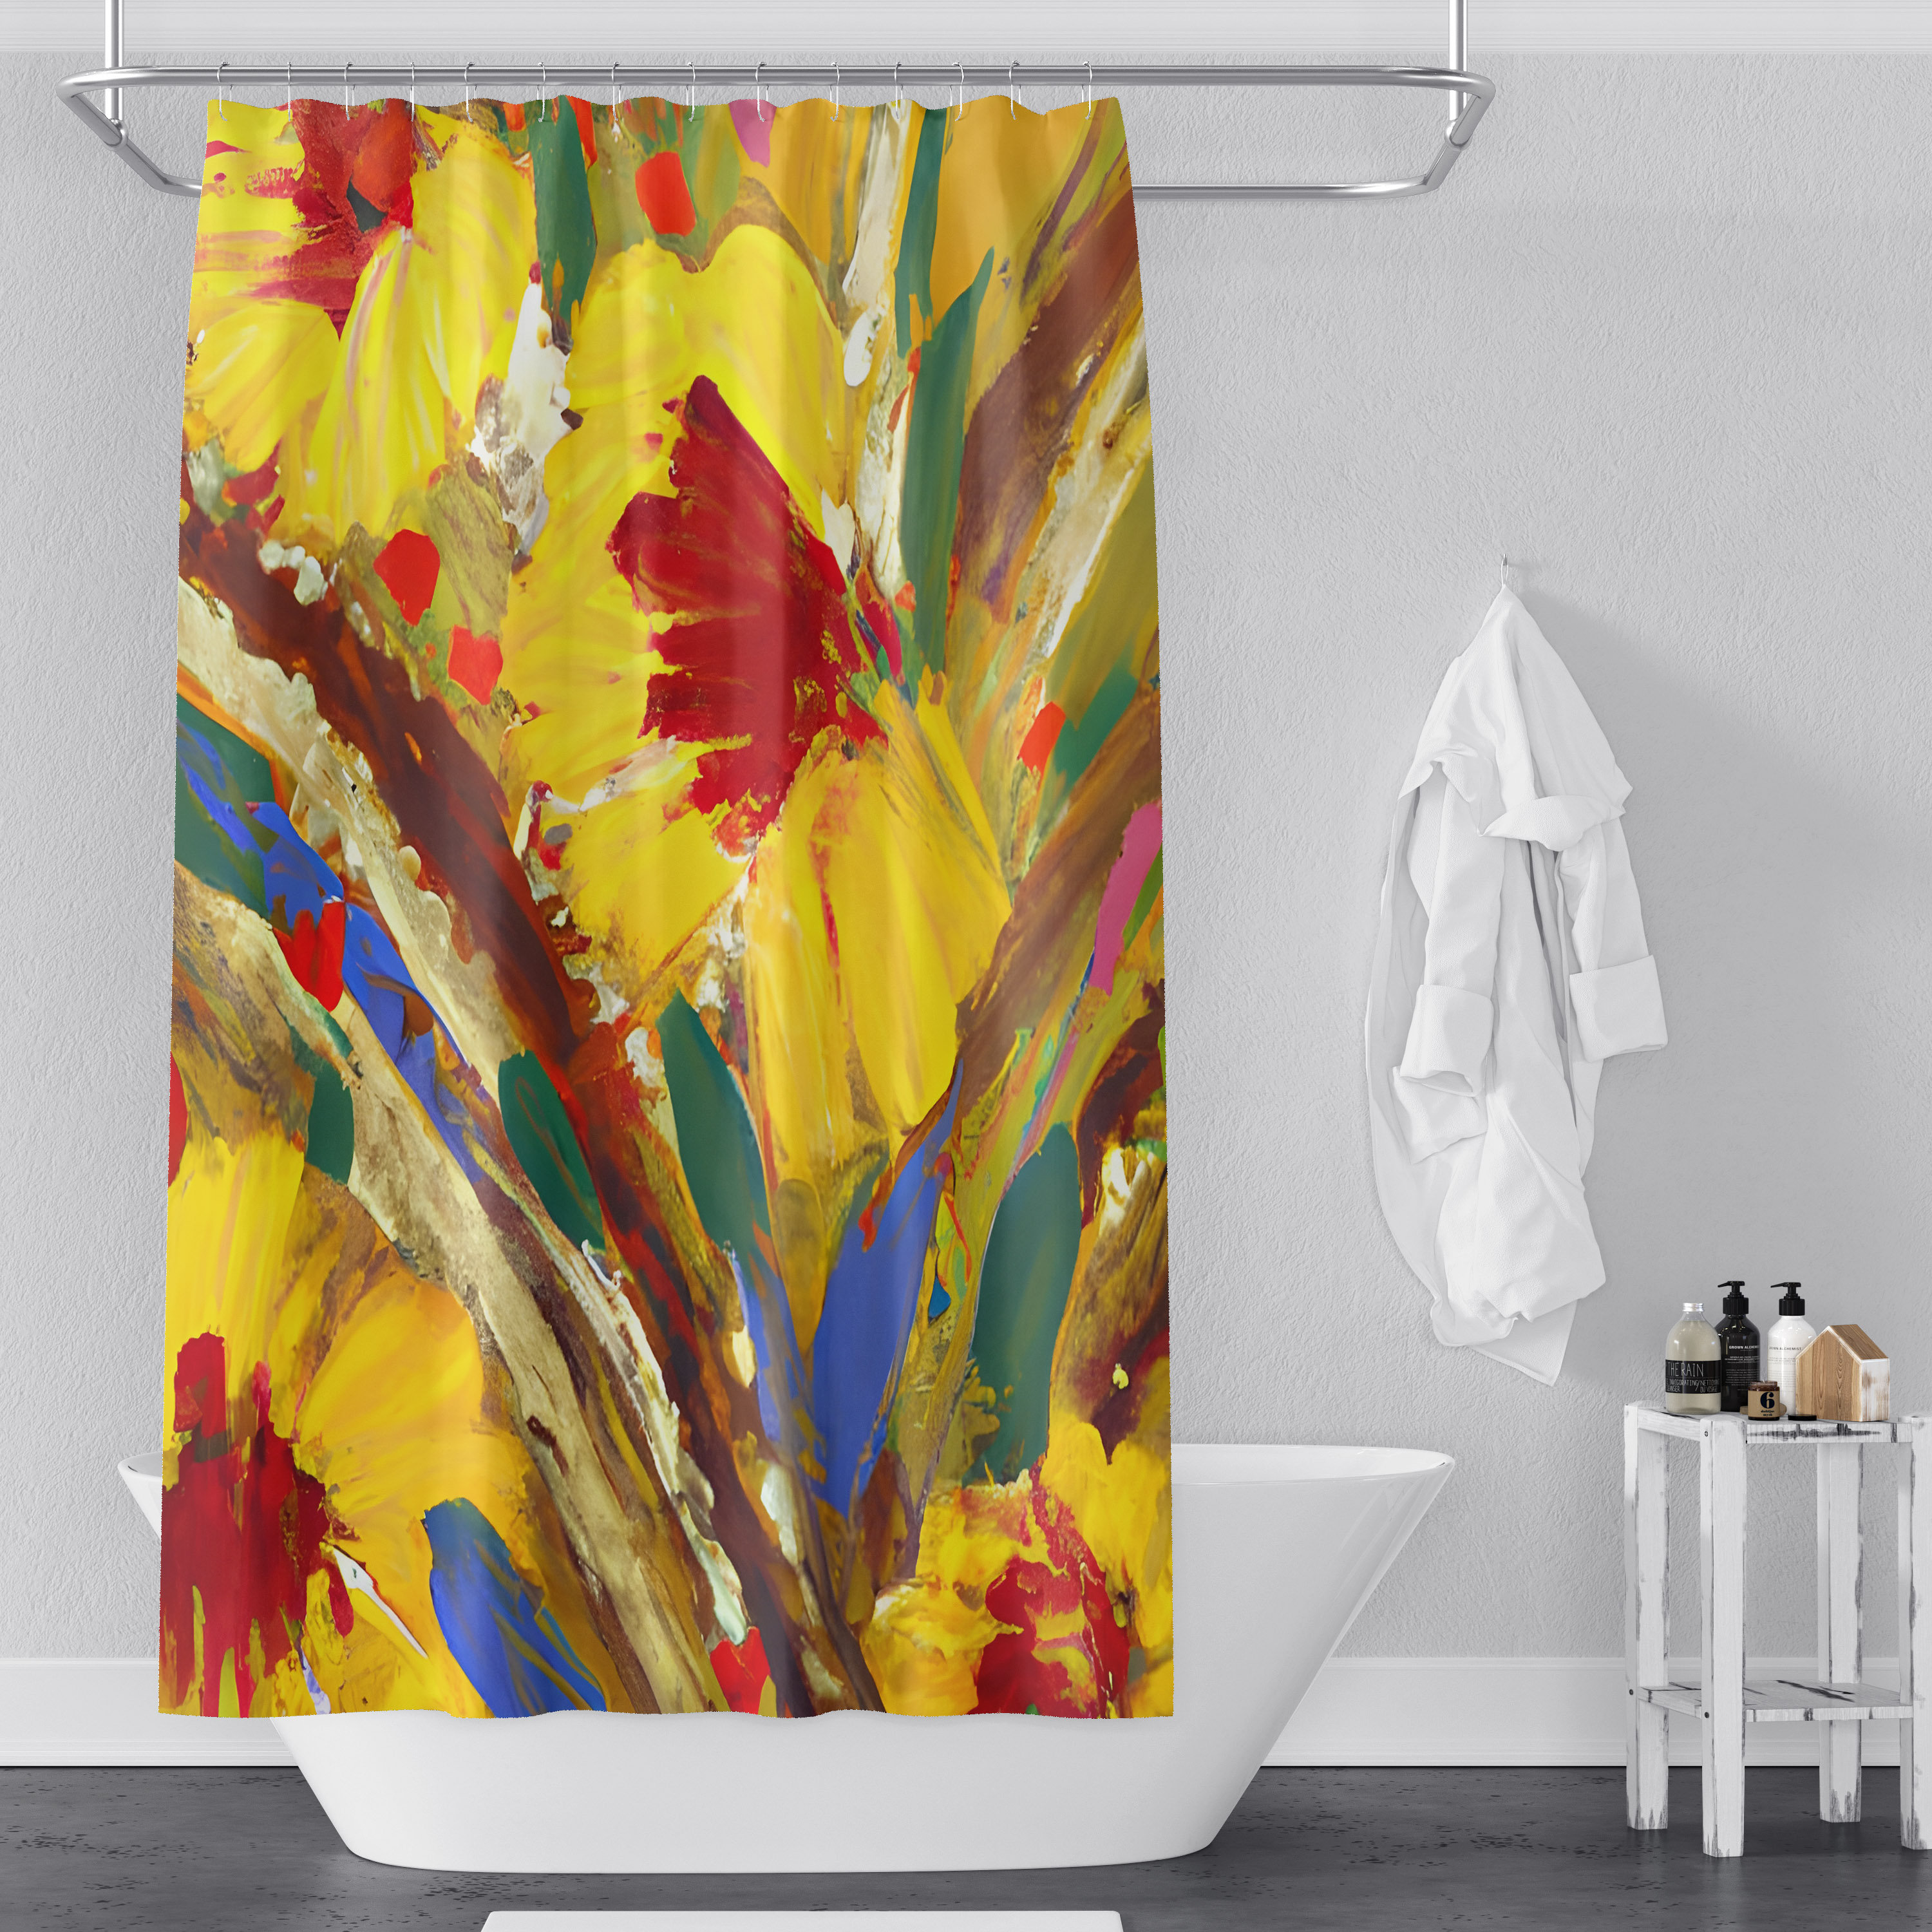 Gainesboro Abstract Shower Curtain East Urban Home Size: 83 H x 70 W